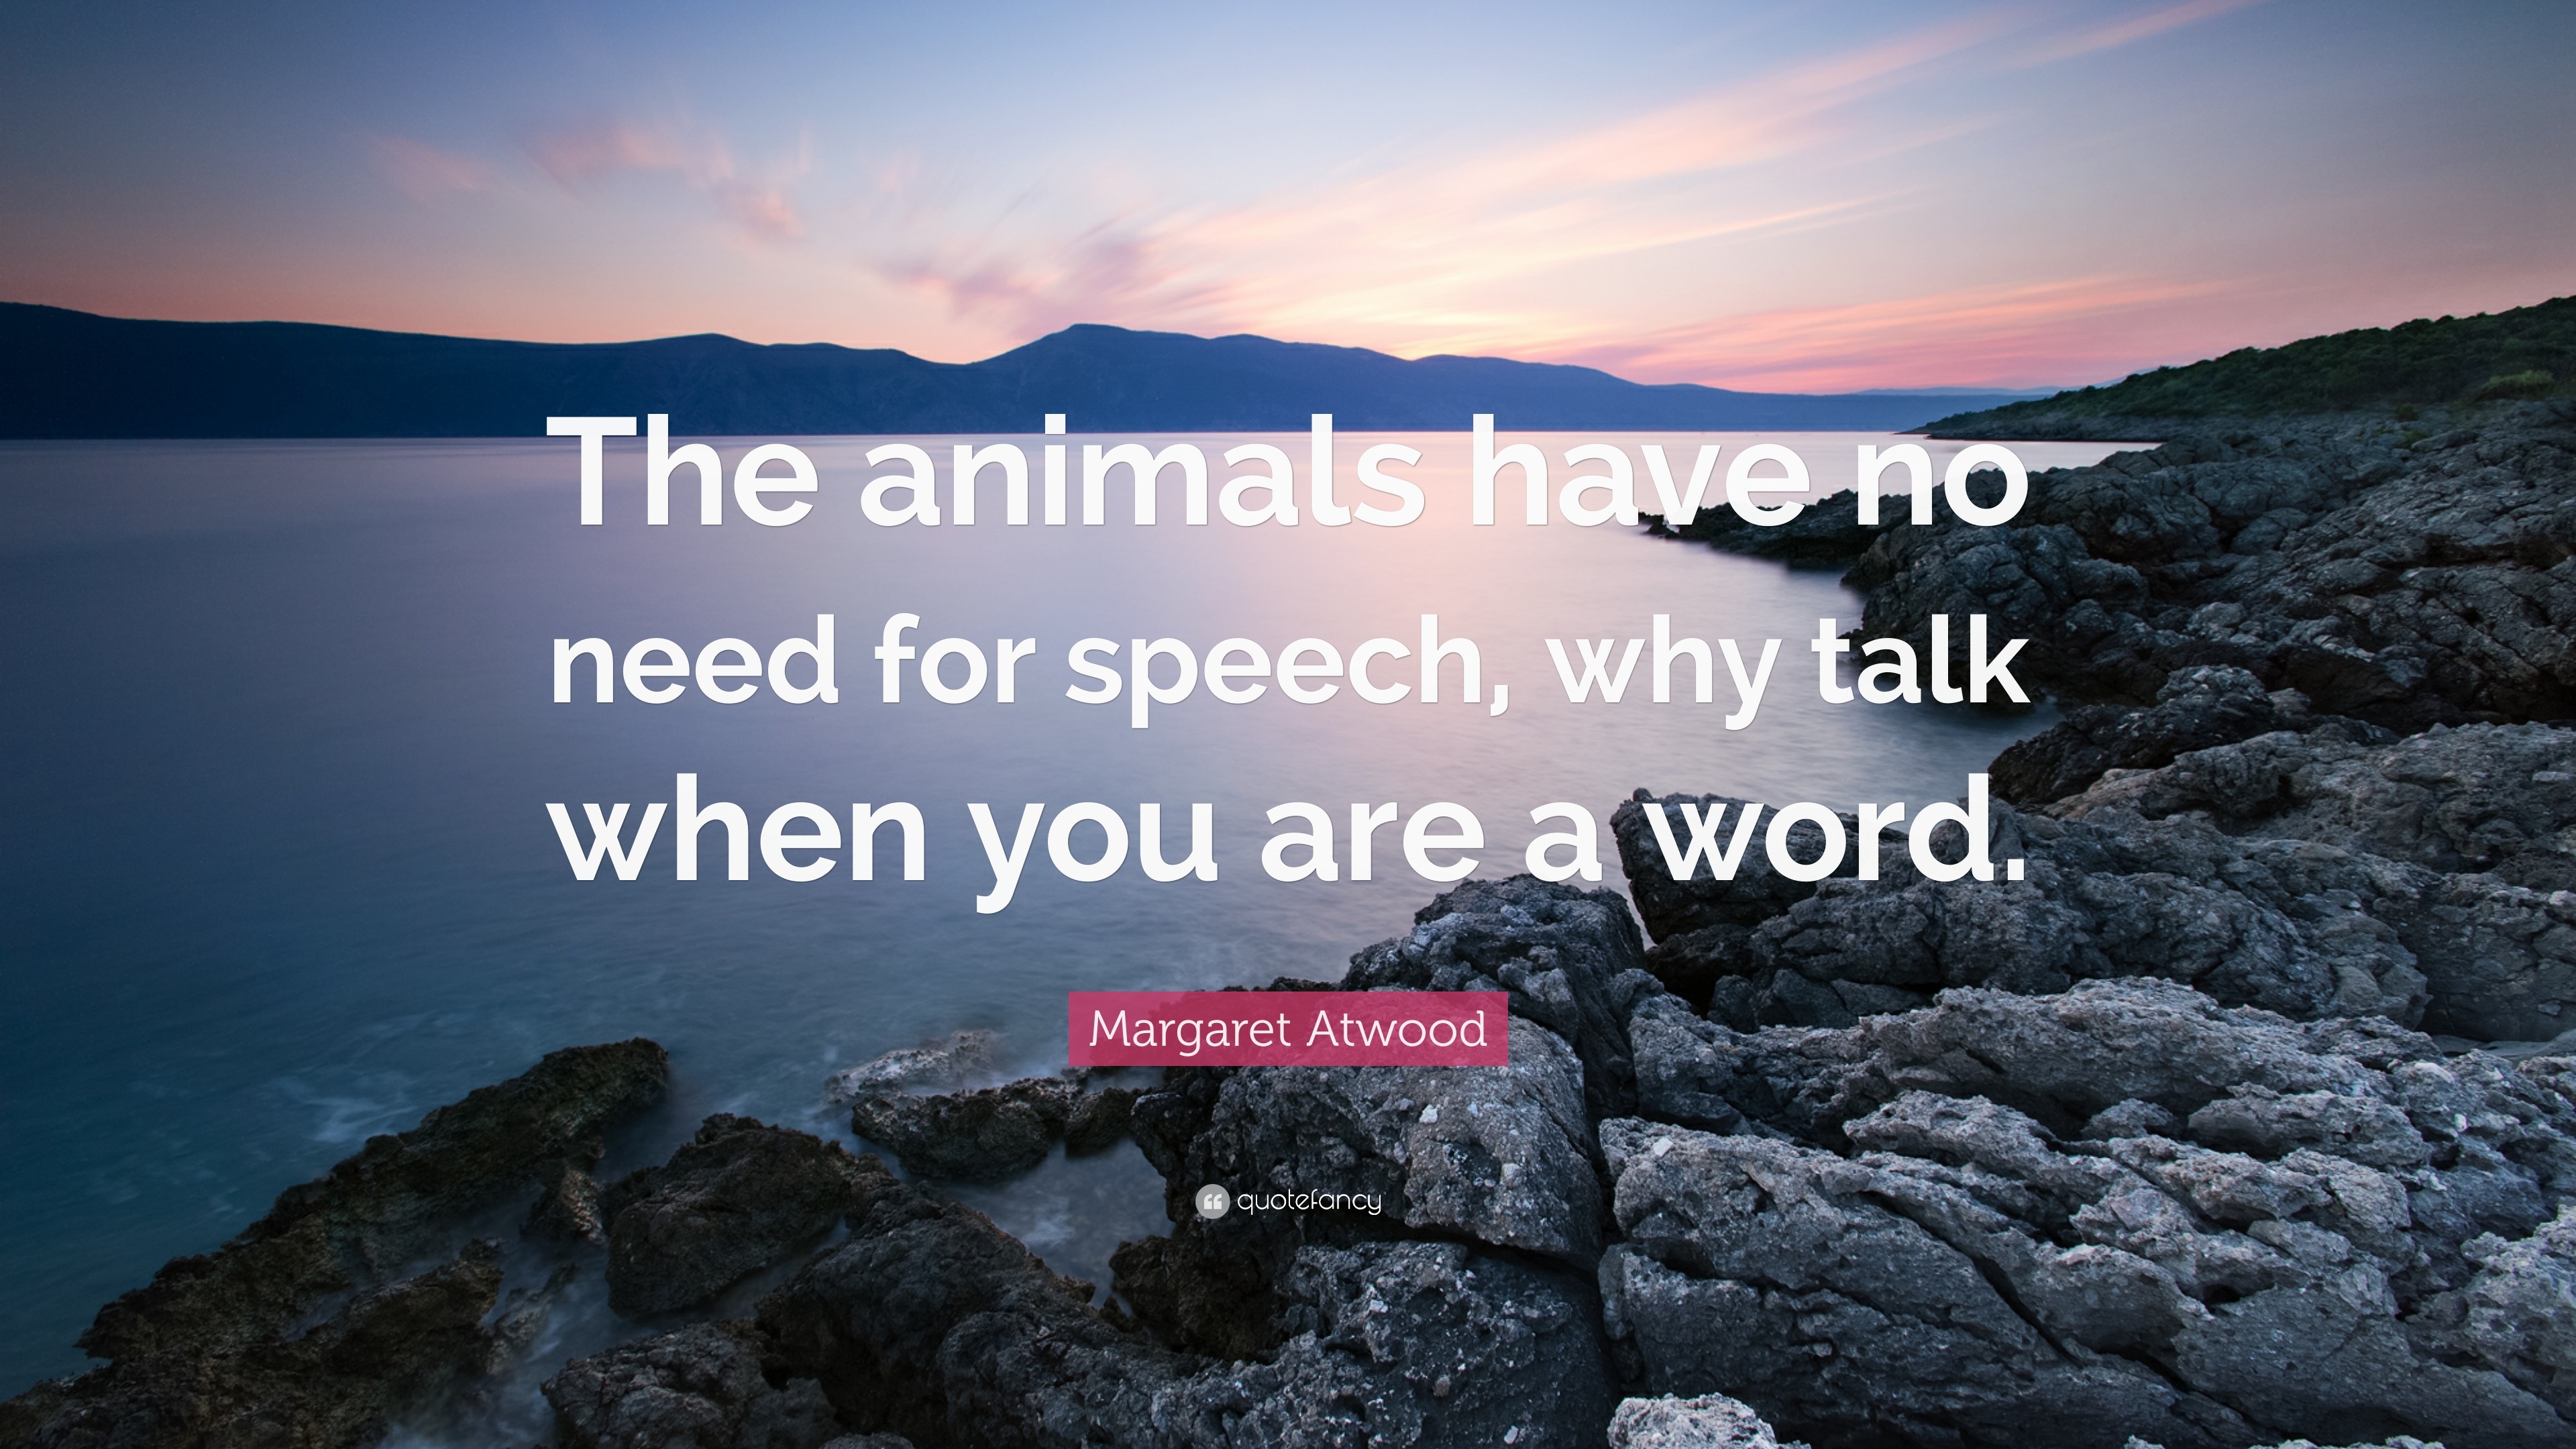 Margaret Atwood Quote: “The animals have no need for speech, why talk when  you are a